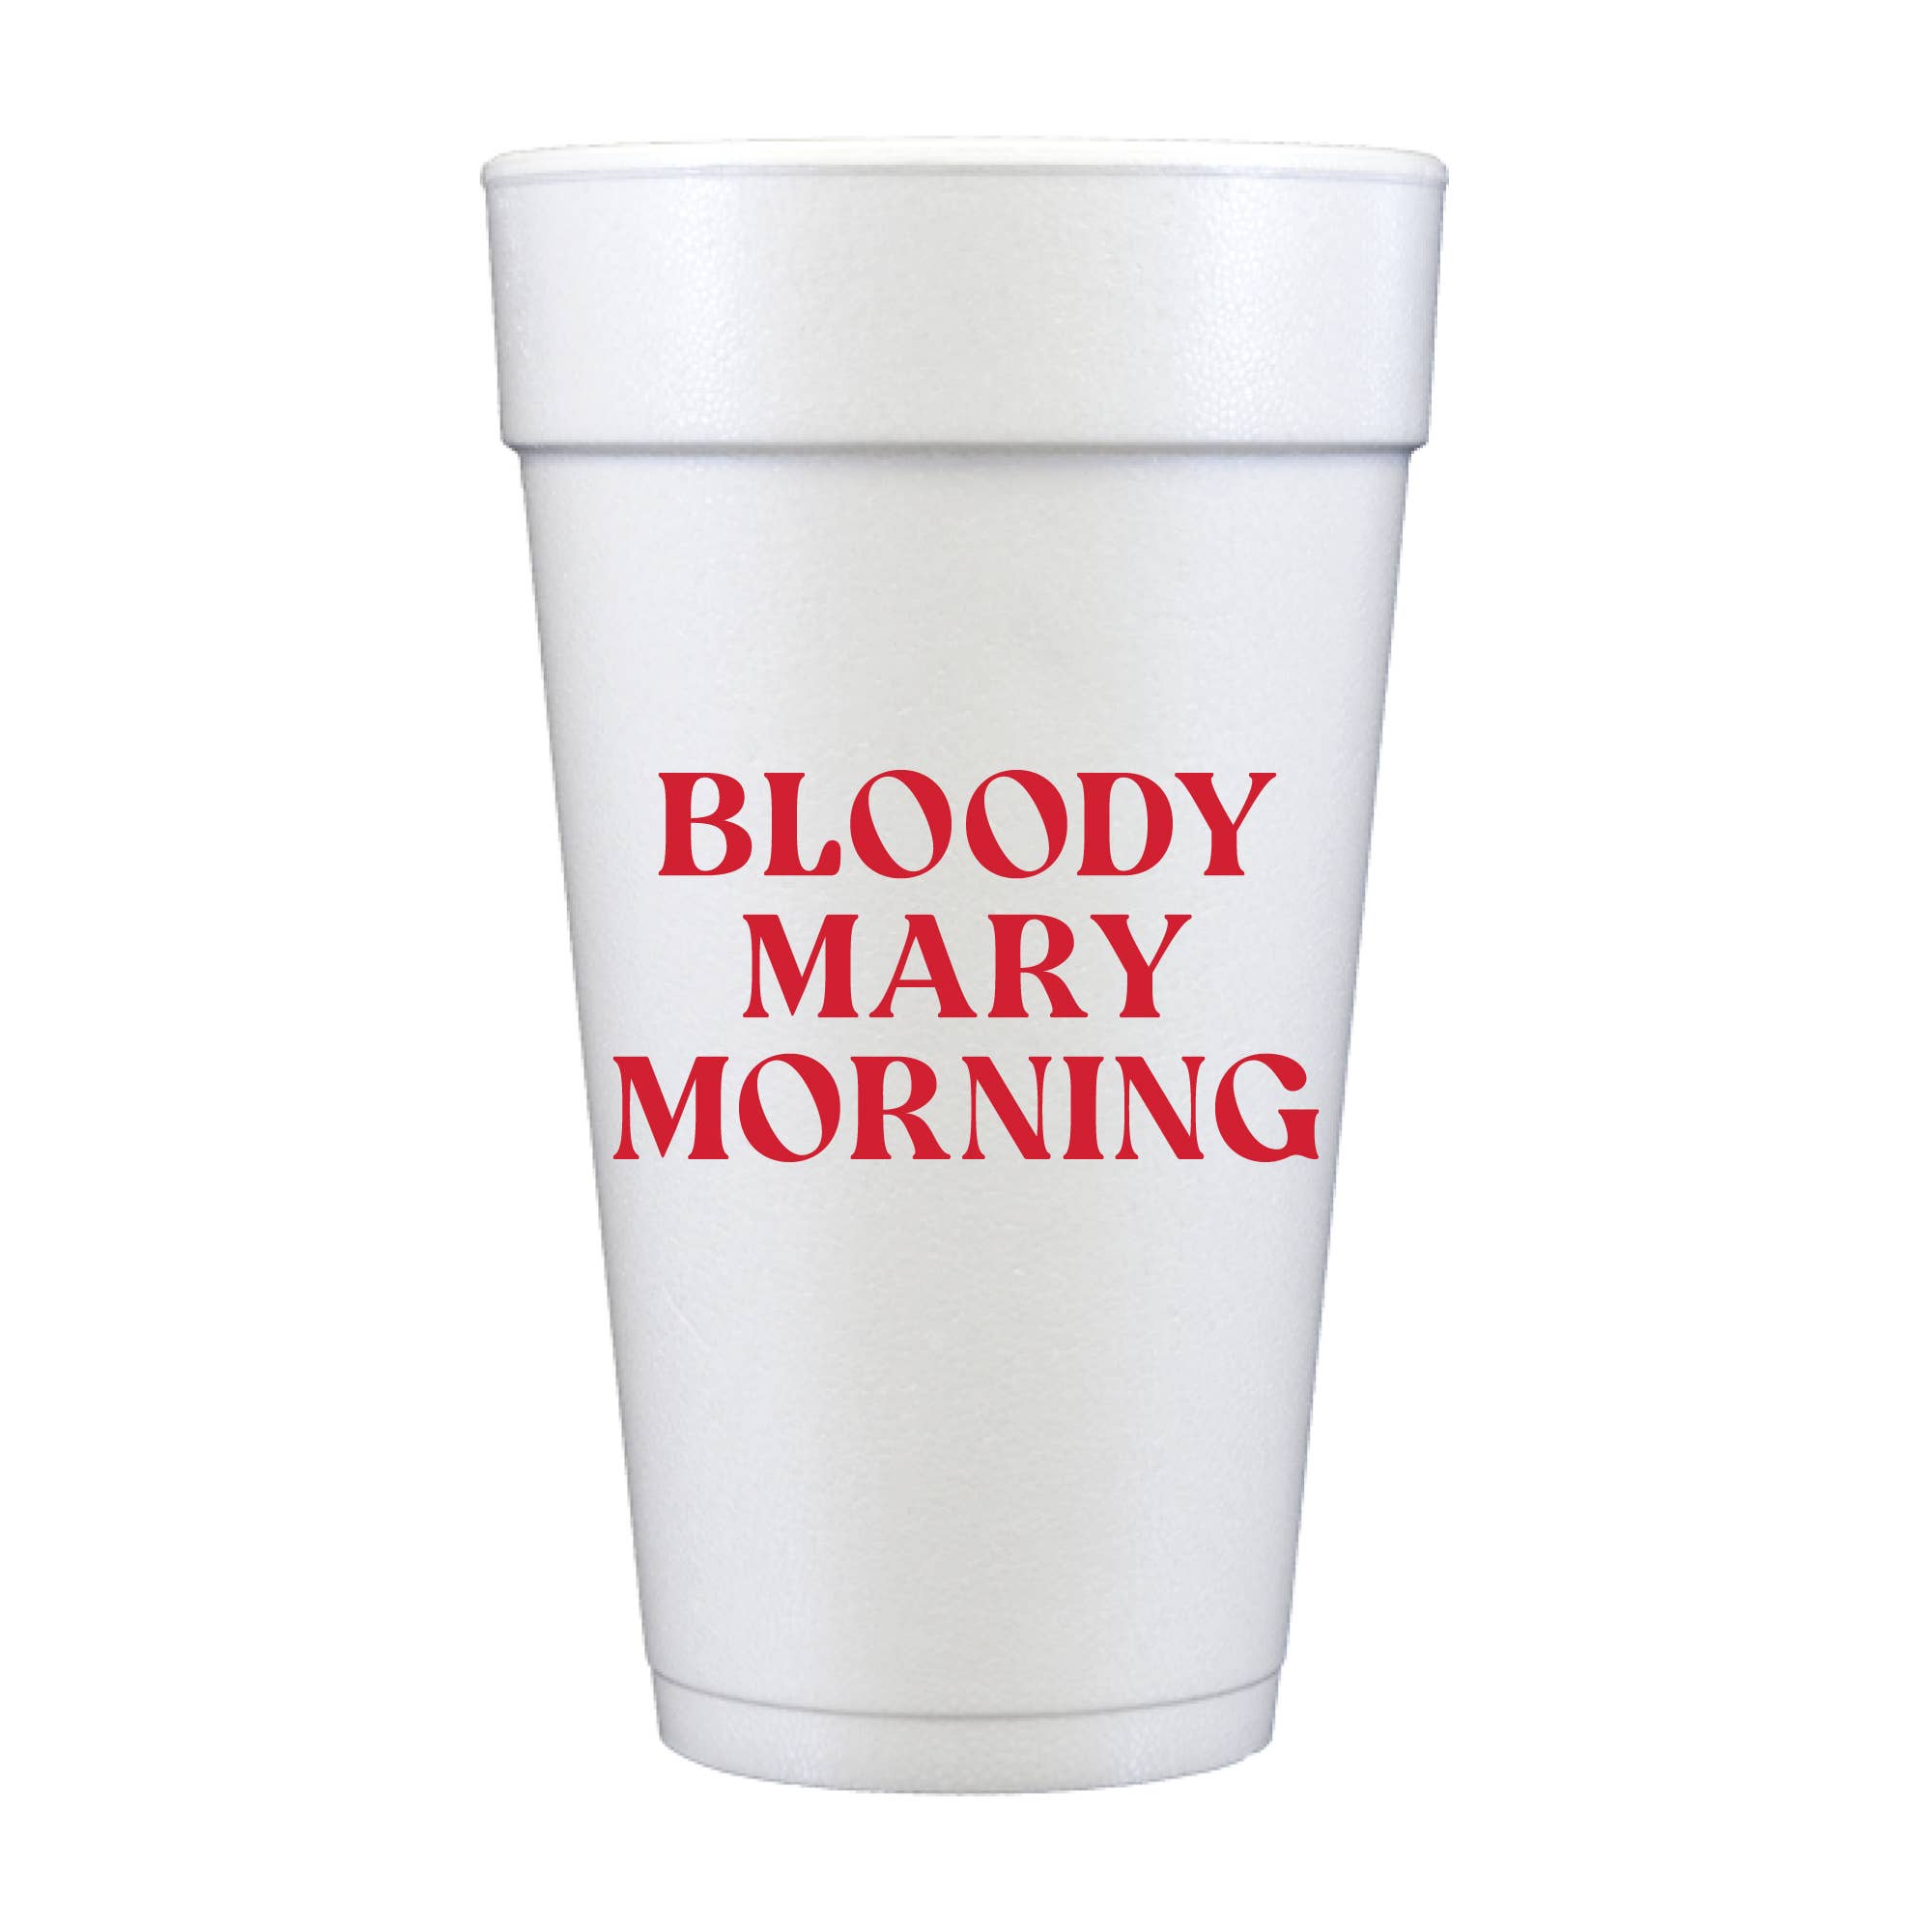 Bloody Mary Morning Foam Cups 10ct